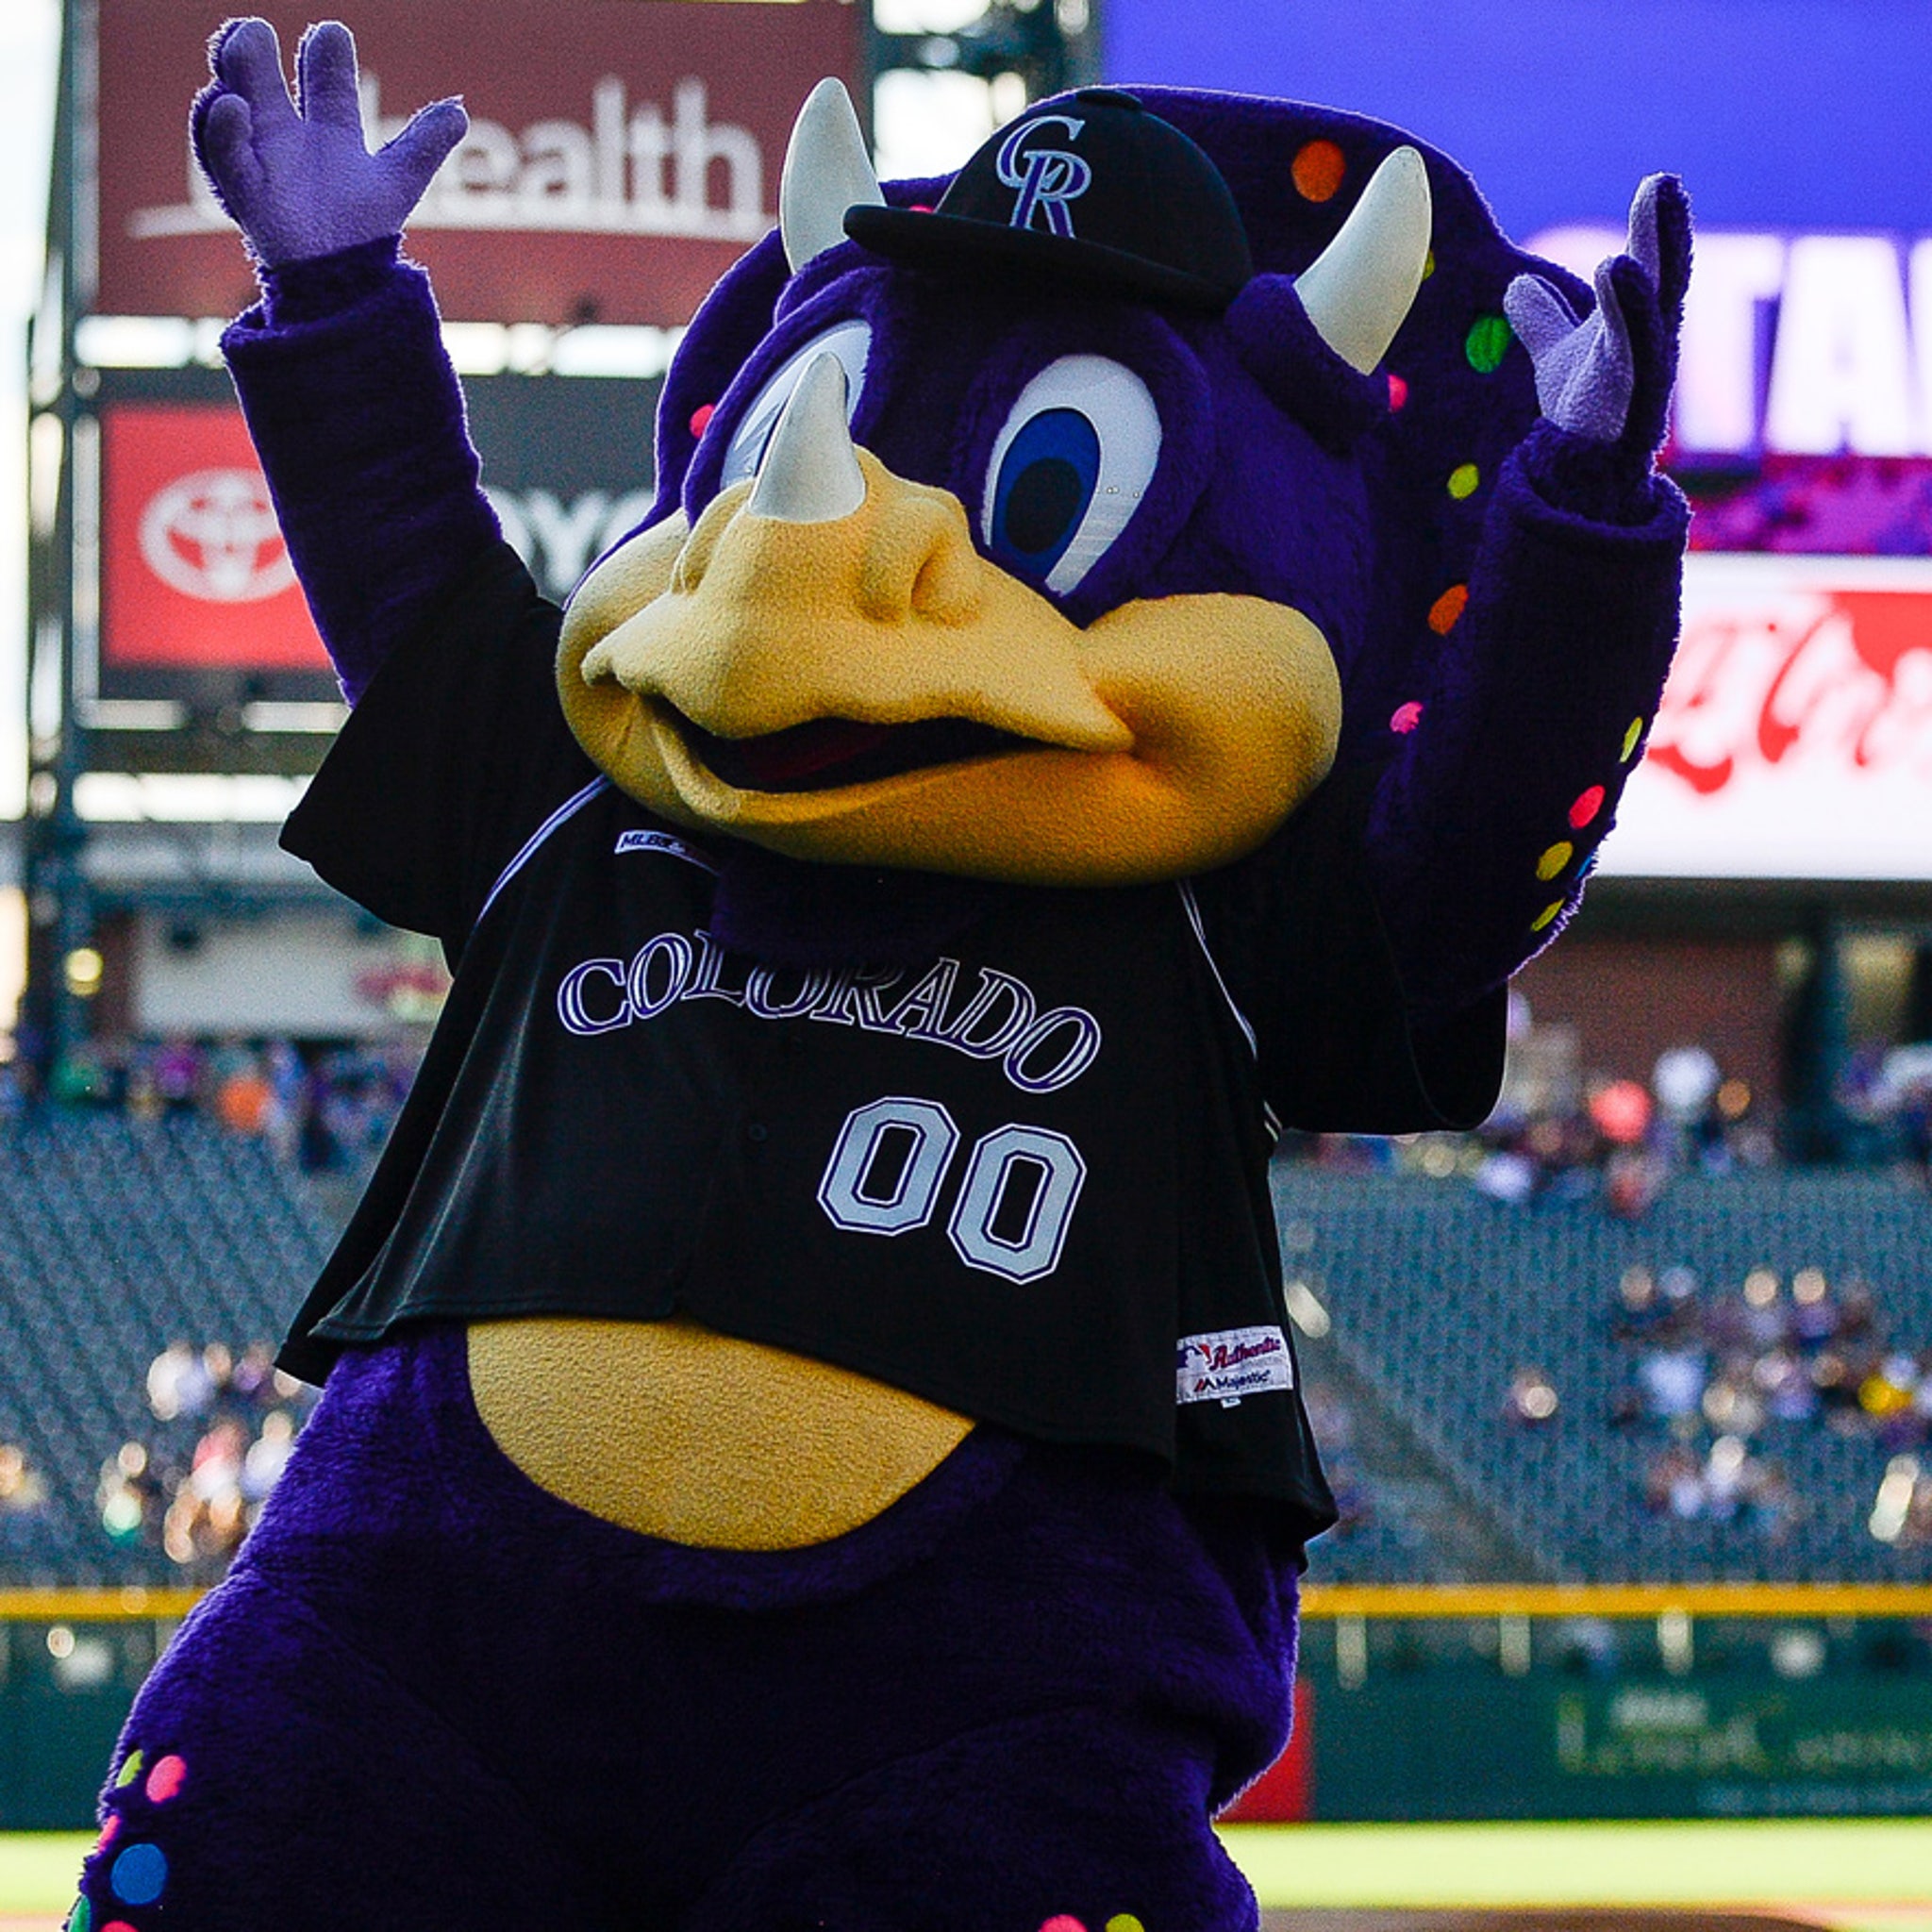 Colorado Rockies mascot Dinger interacts with fans prior to a